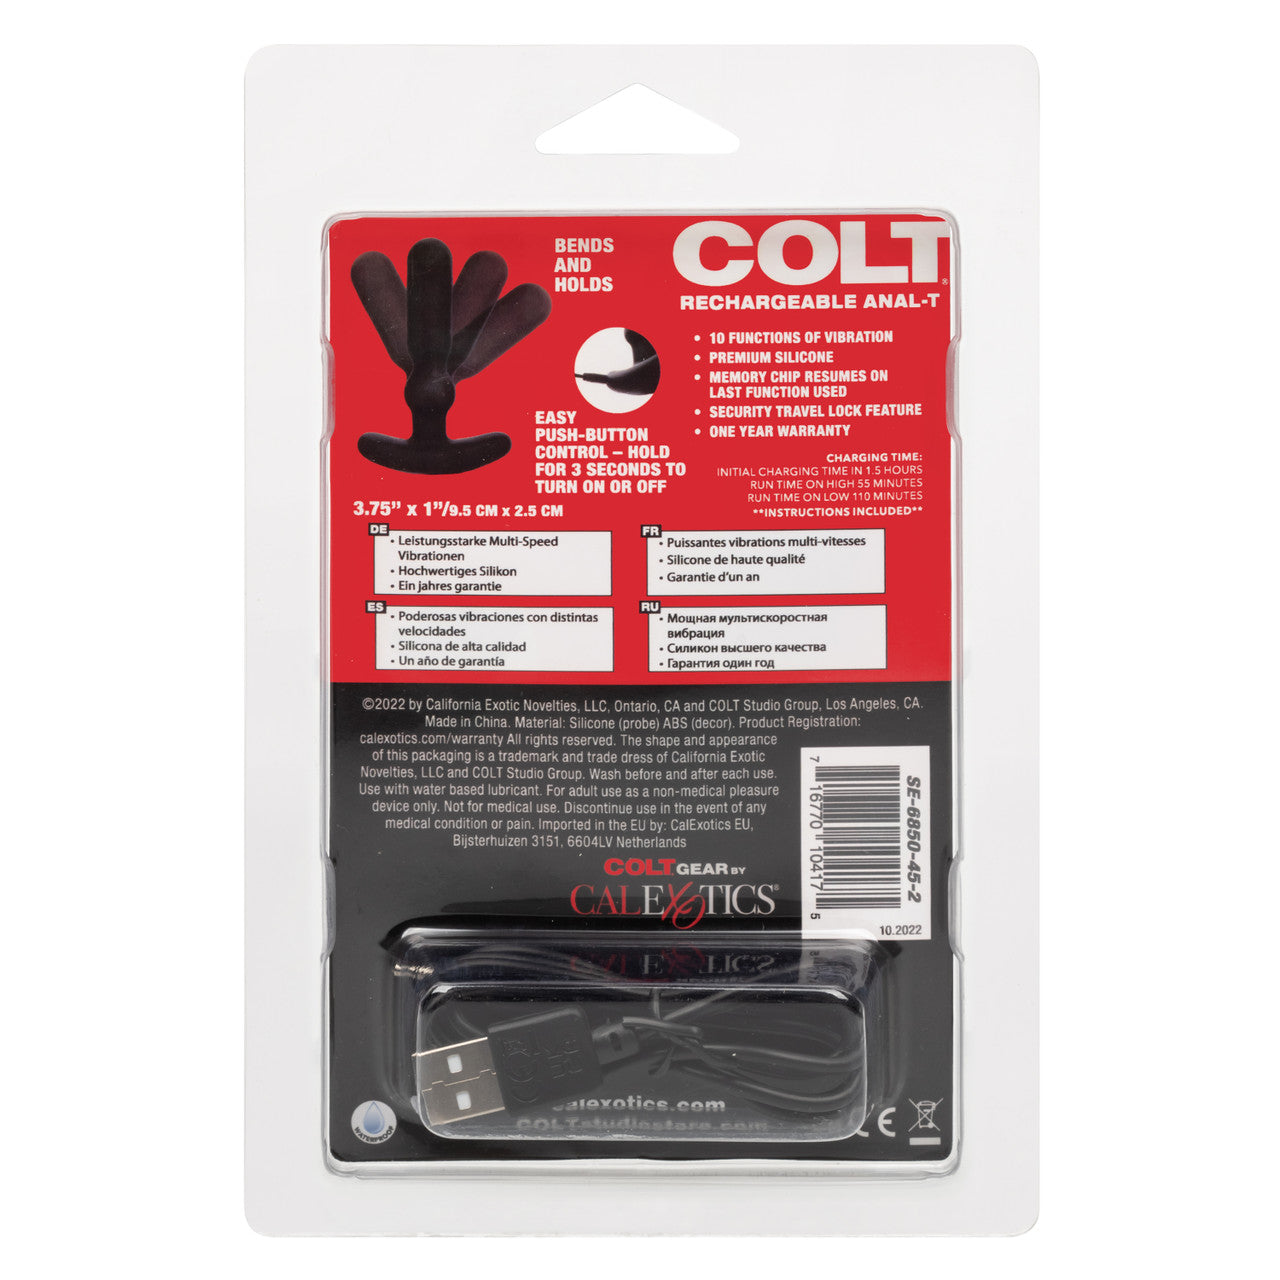 The back of the packaging for the Colt Rechargeable Anal-T Prostate Massager.